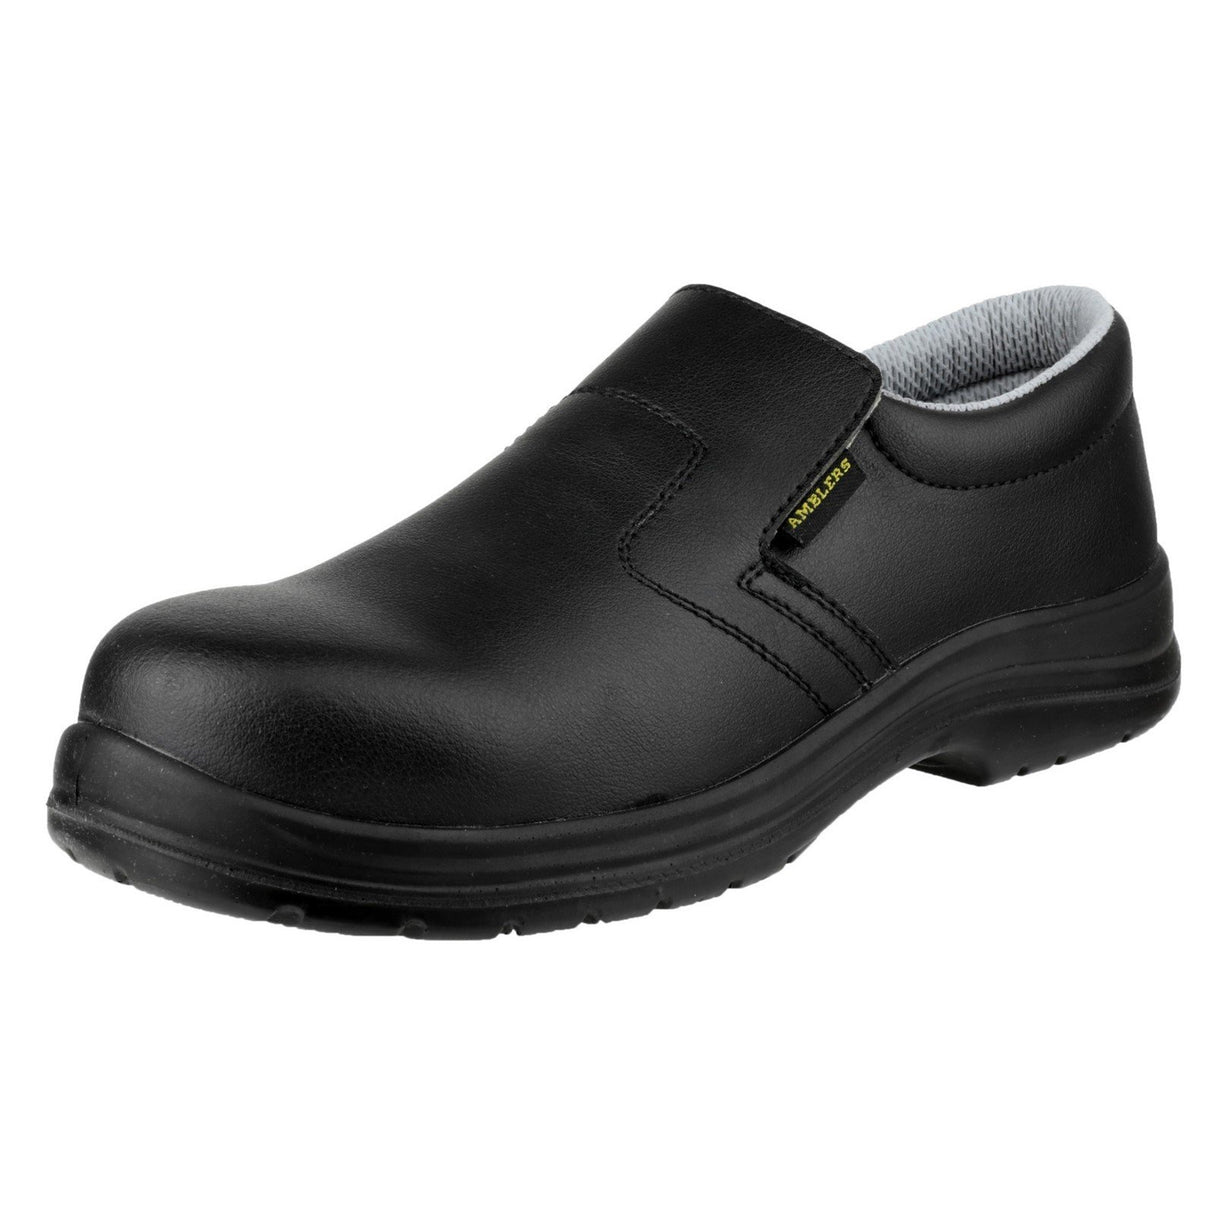 Amblers Safety Metal Free Lightweight Slip On Safety Shoes